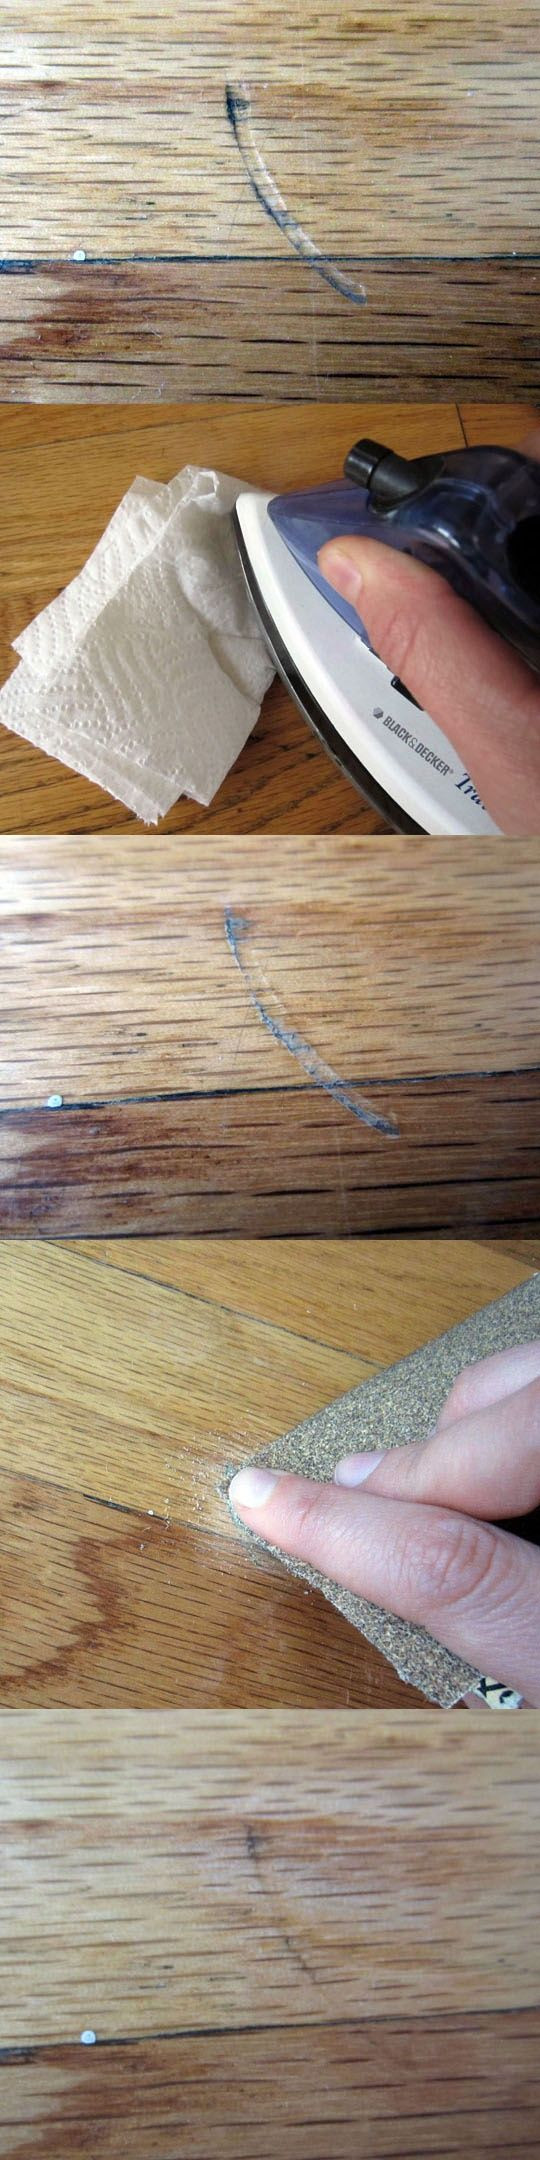 DIY Restore Hardwood Floors
 How To Fix Dents in Wooden Floors & Furniture With an